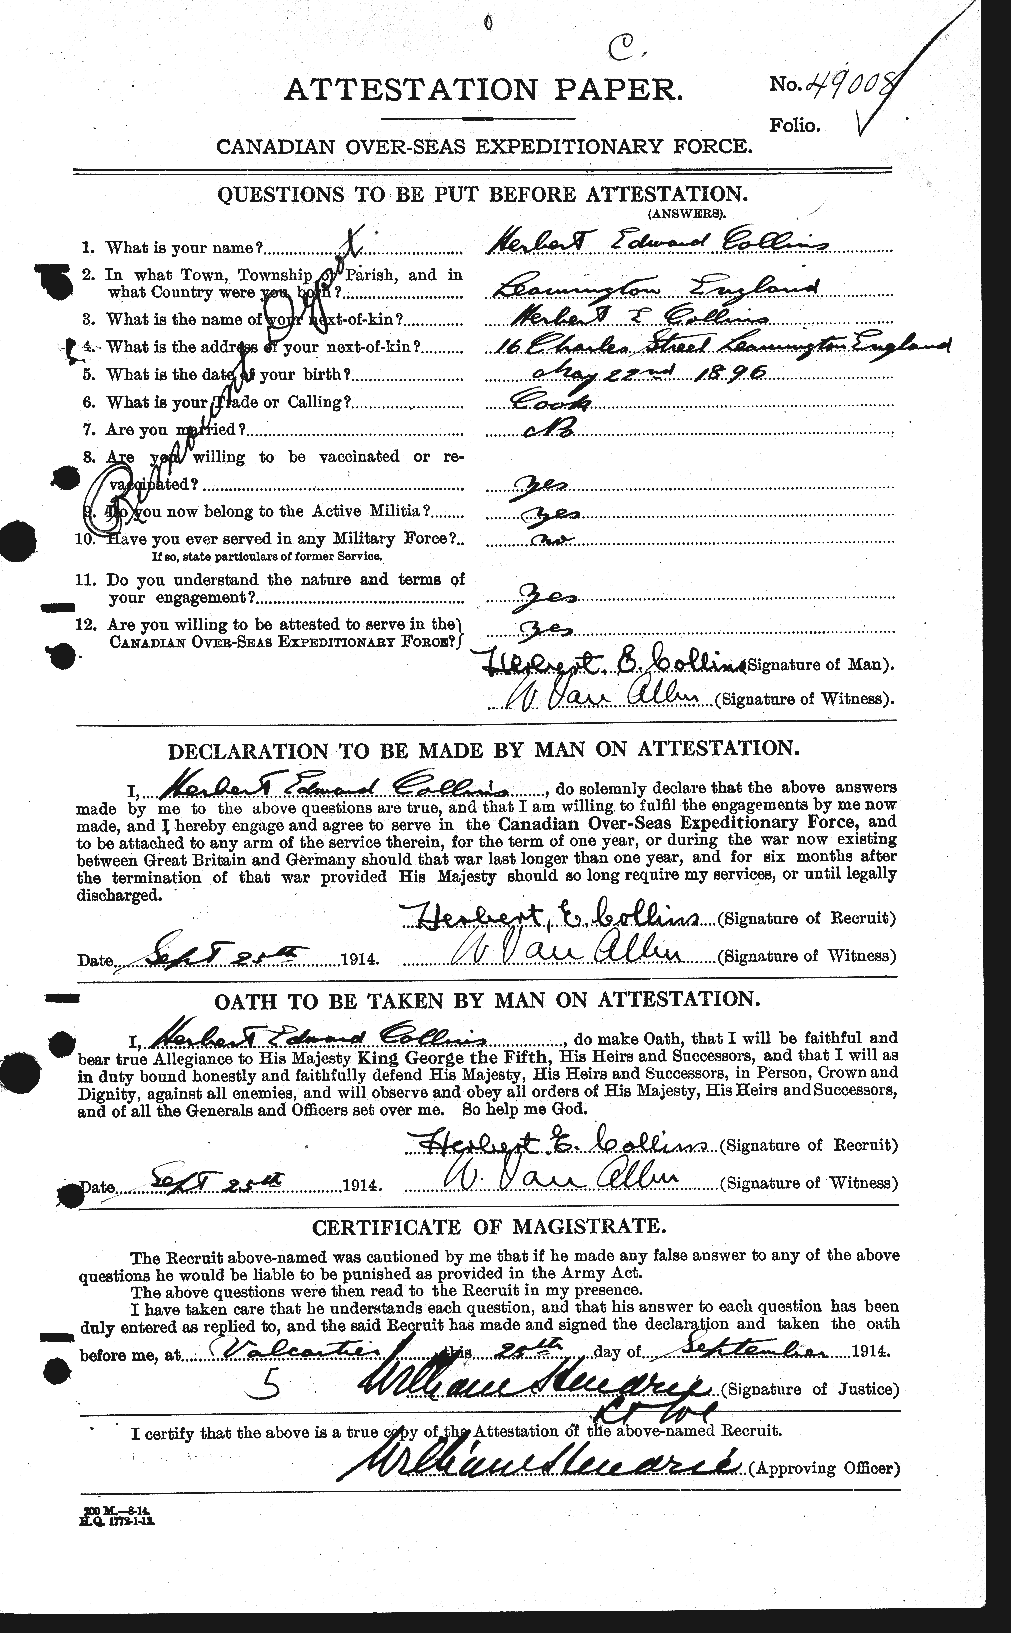 Personnel Records of the First World War - CEF 070001a